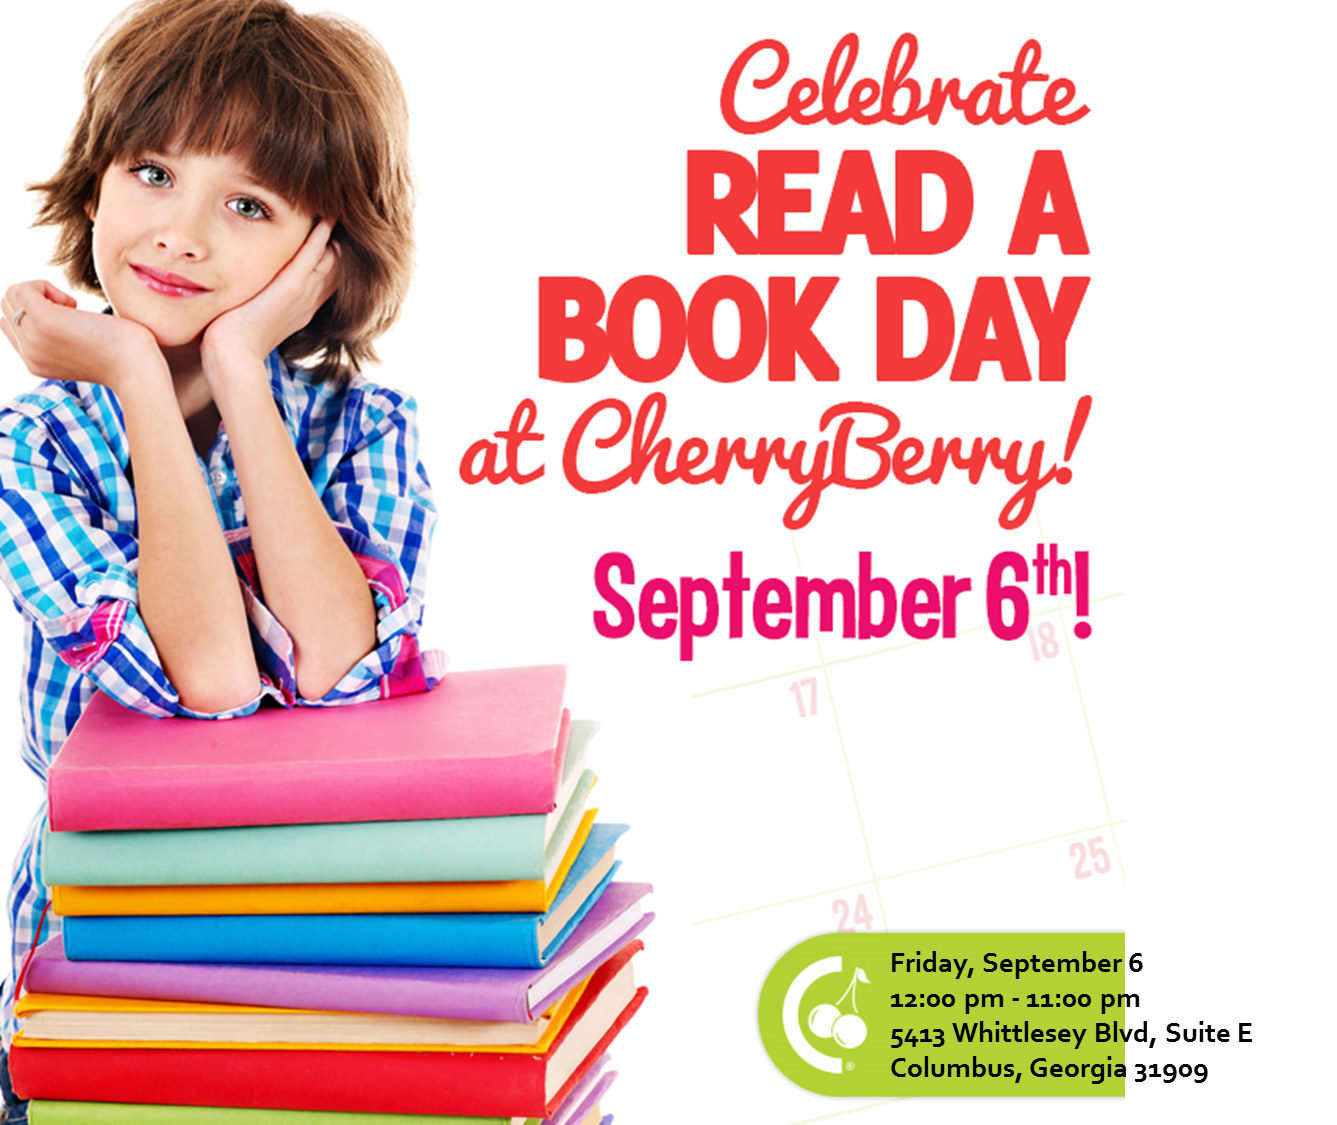 Celebrate Read a Book Day at CherryBerry